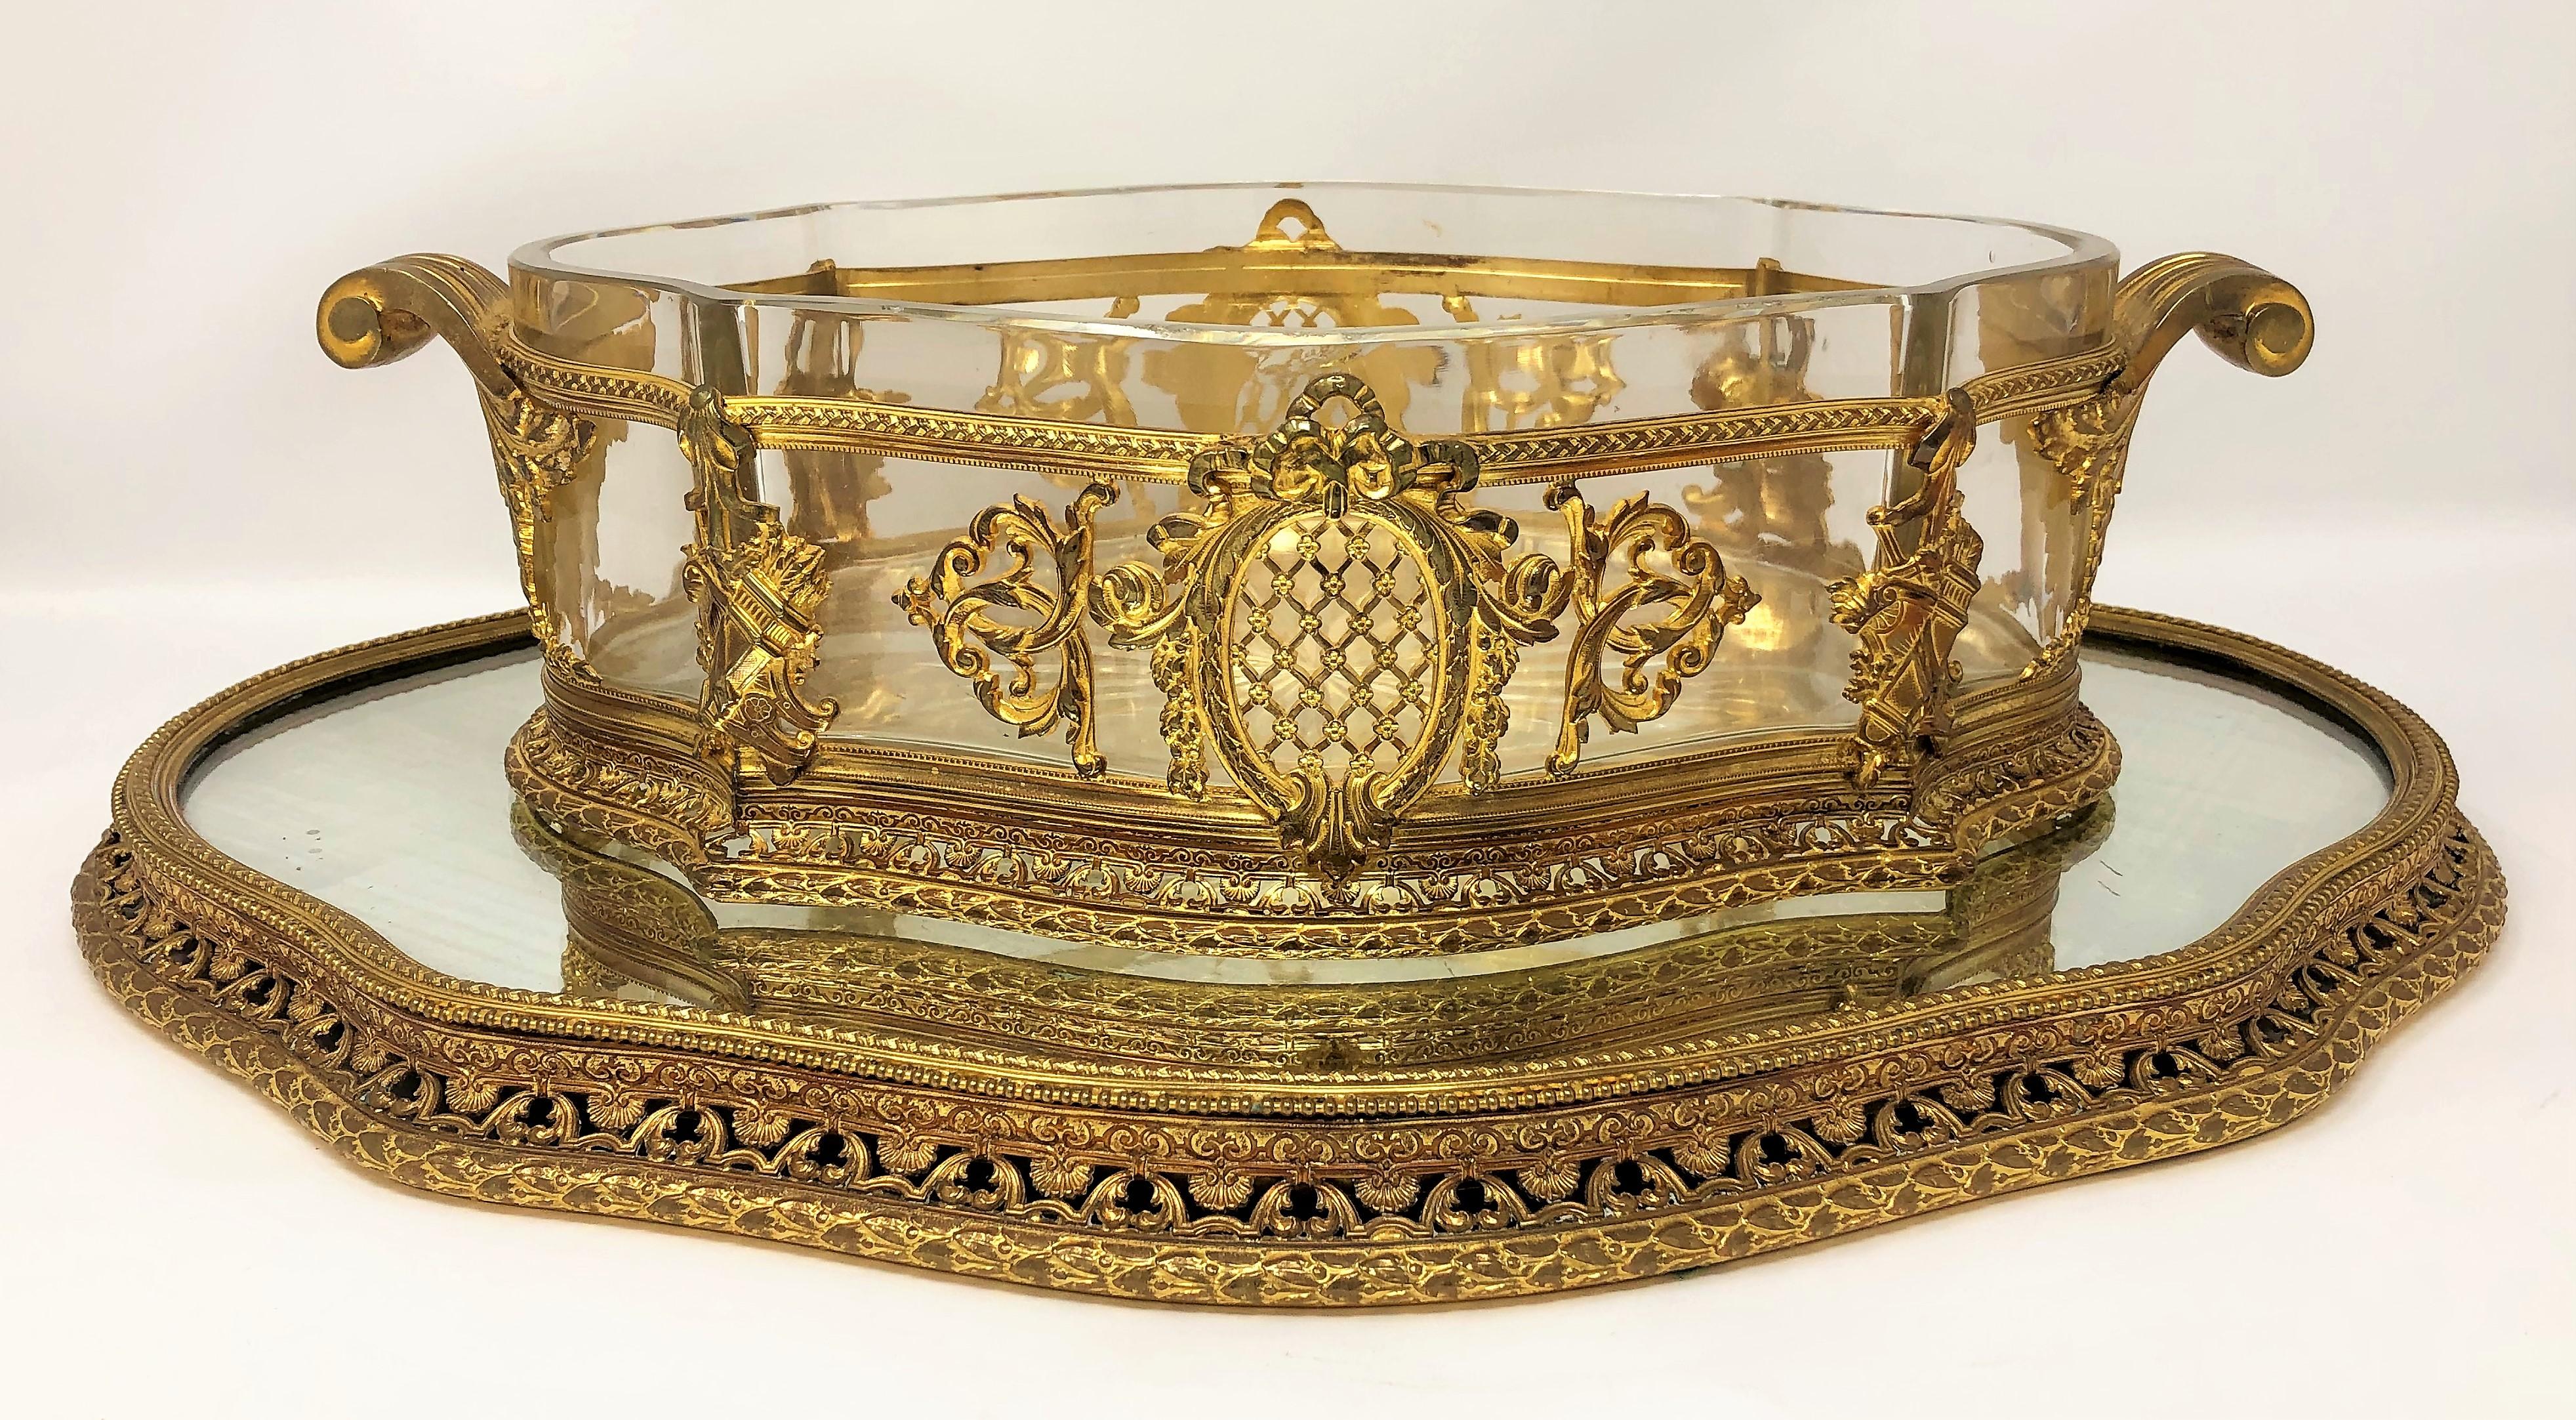 Antique French bronze D'Ore and cut crystal centerpiece with mirrored plateau, circa 1880s.
Measures: Centerpiece: 4